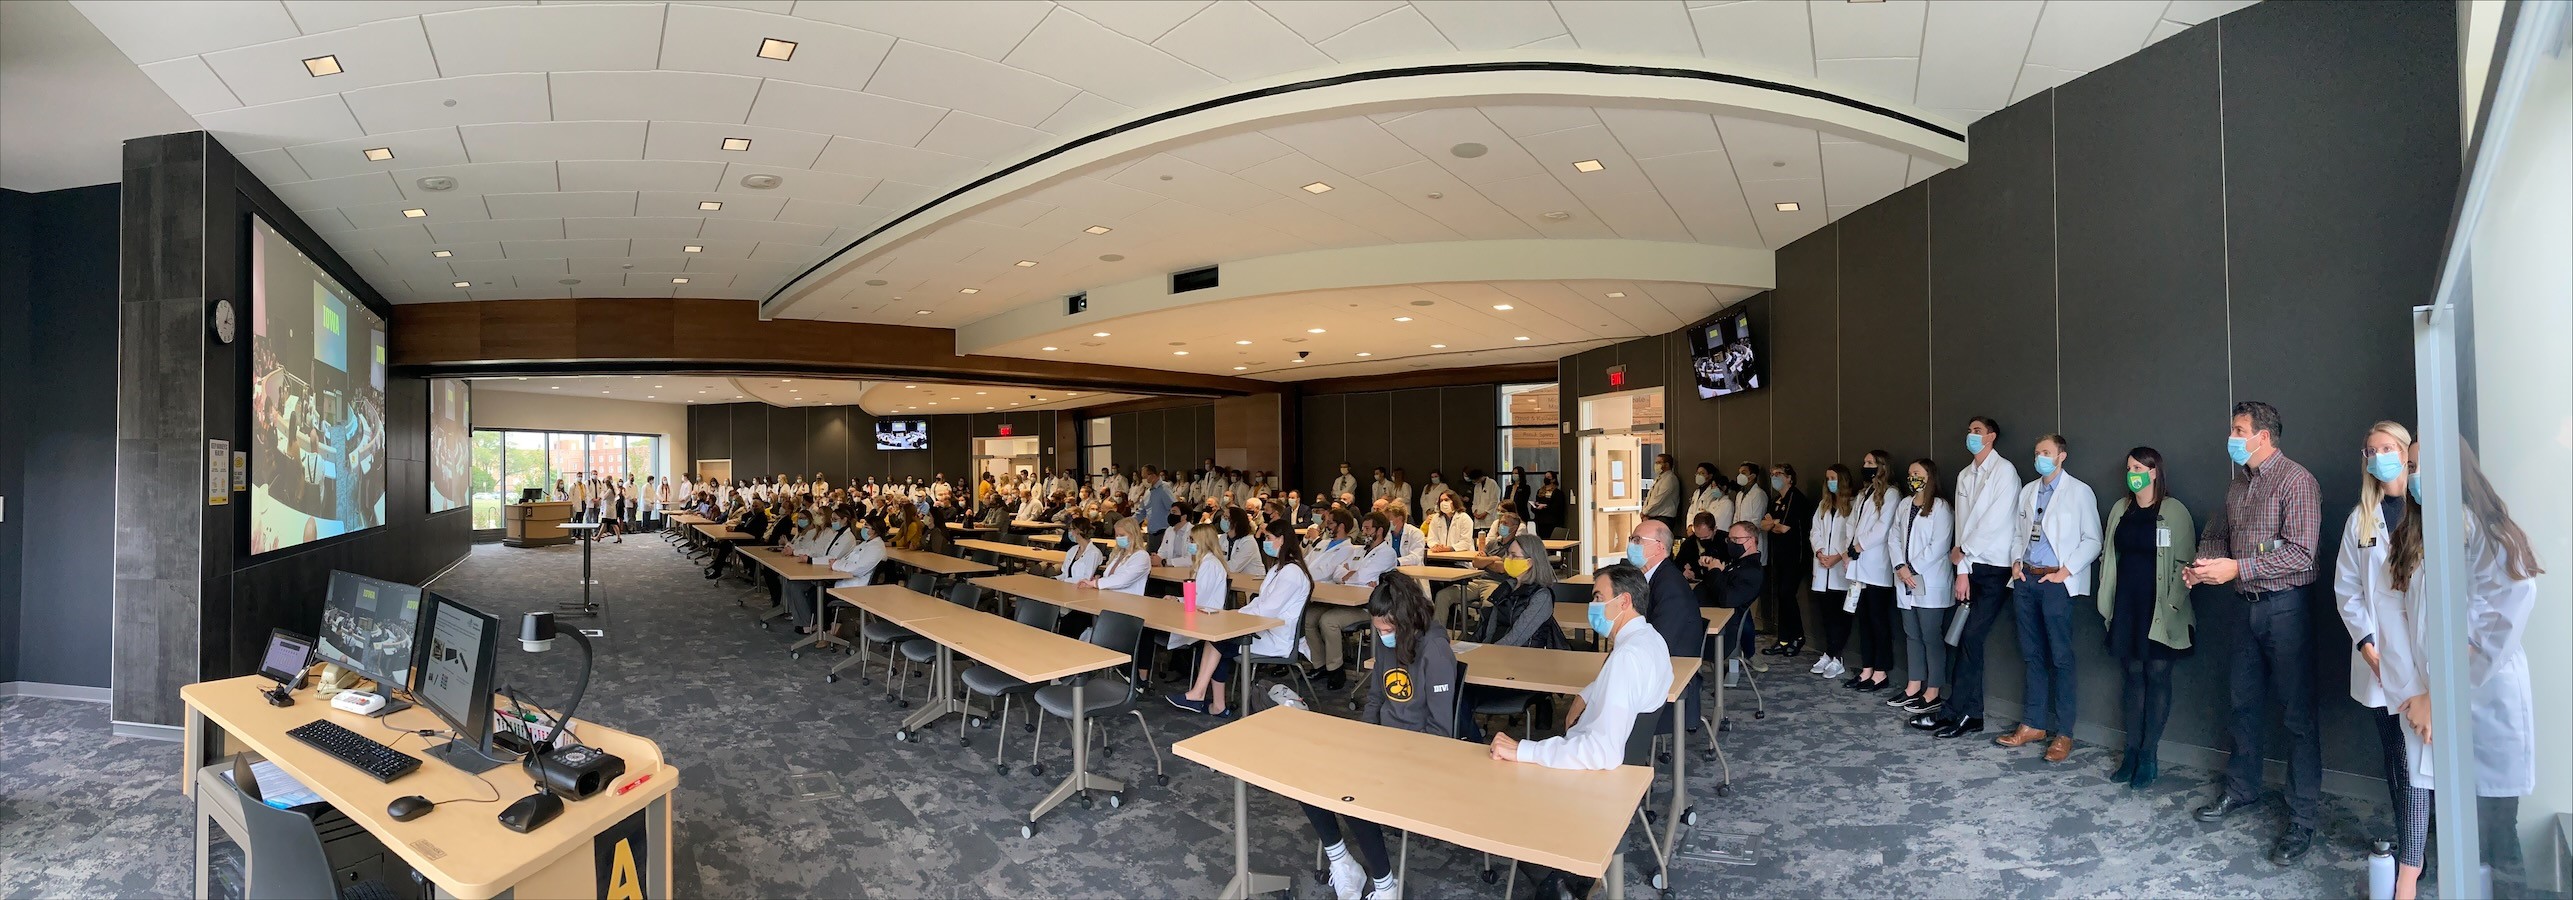 Participants at the 2021 UI College of Pharmacy Building dedication in the large overflow classroom.